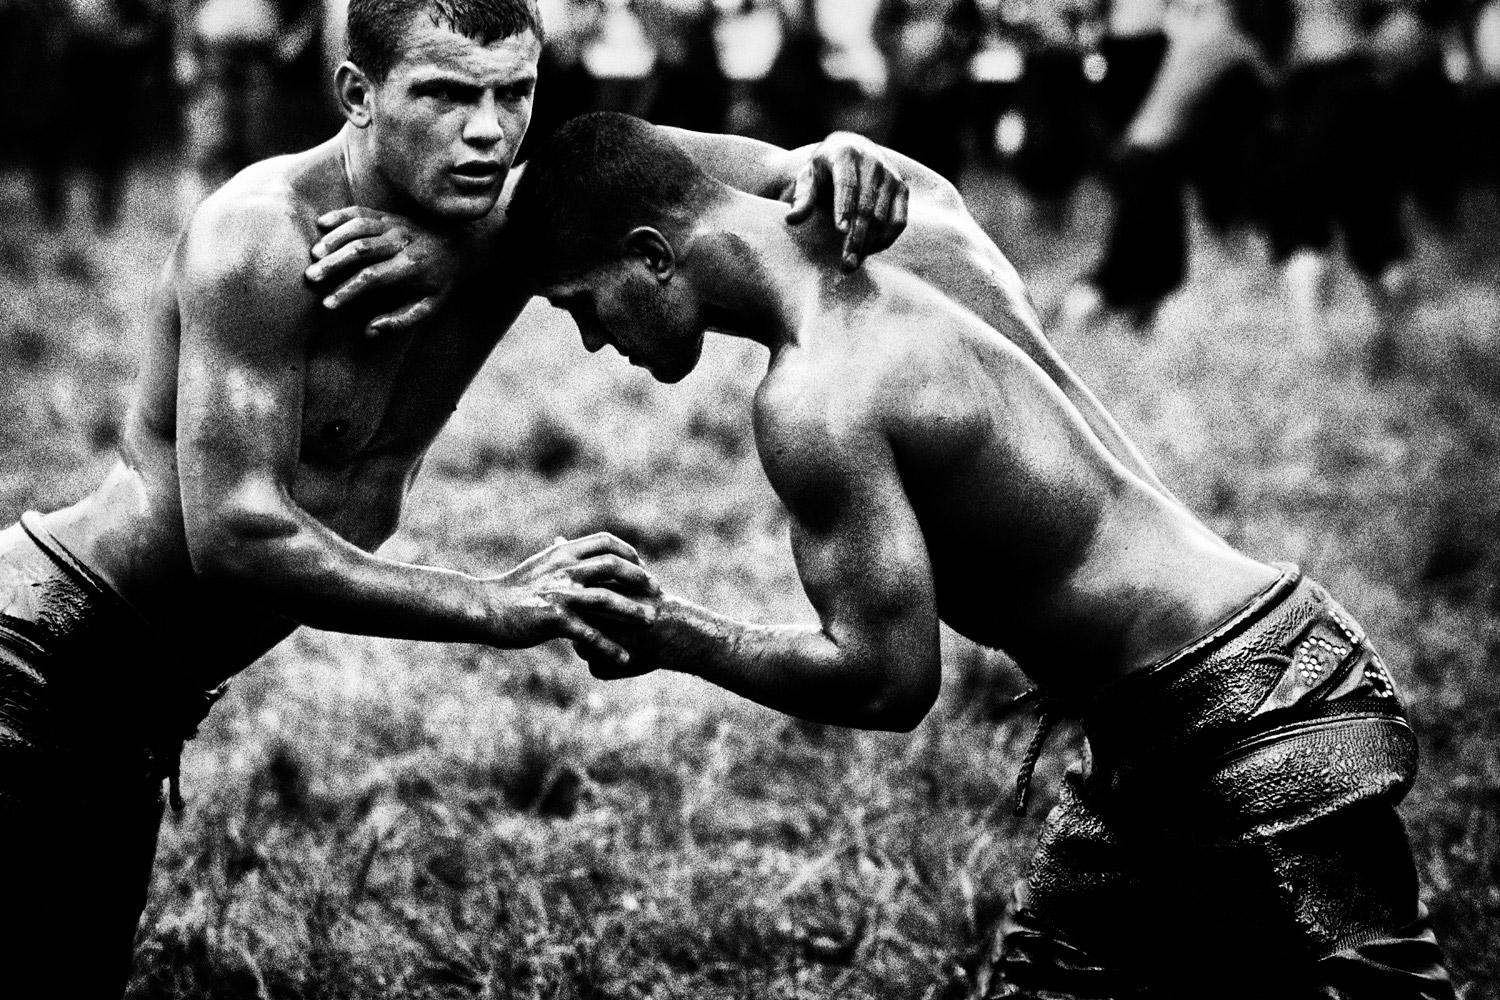 Two wrestlers in the Kirkpinar festival make contact.